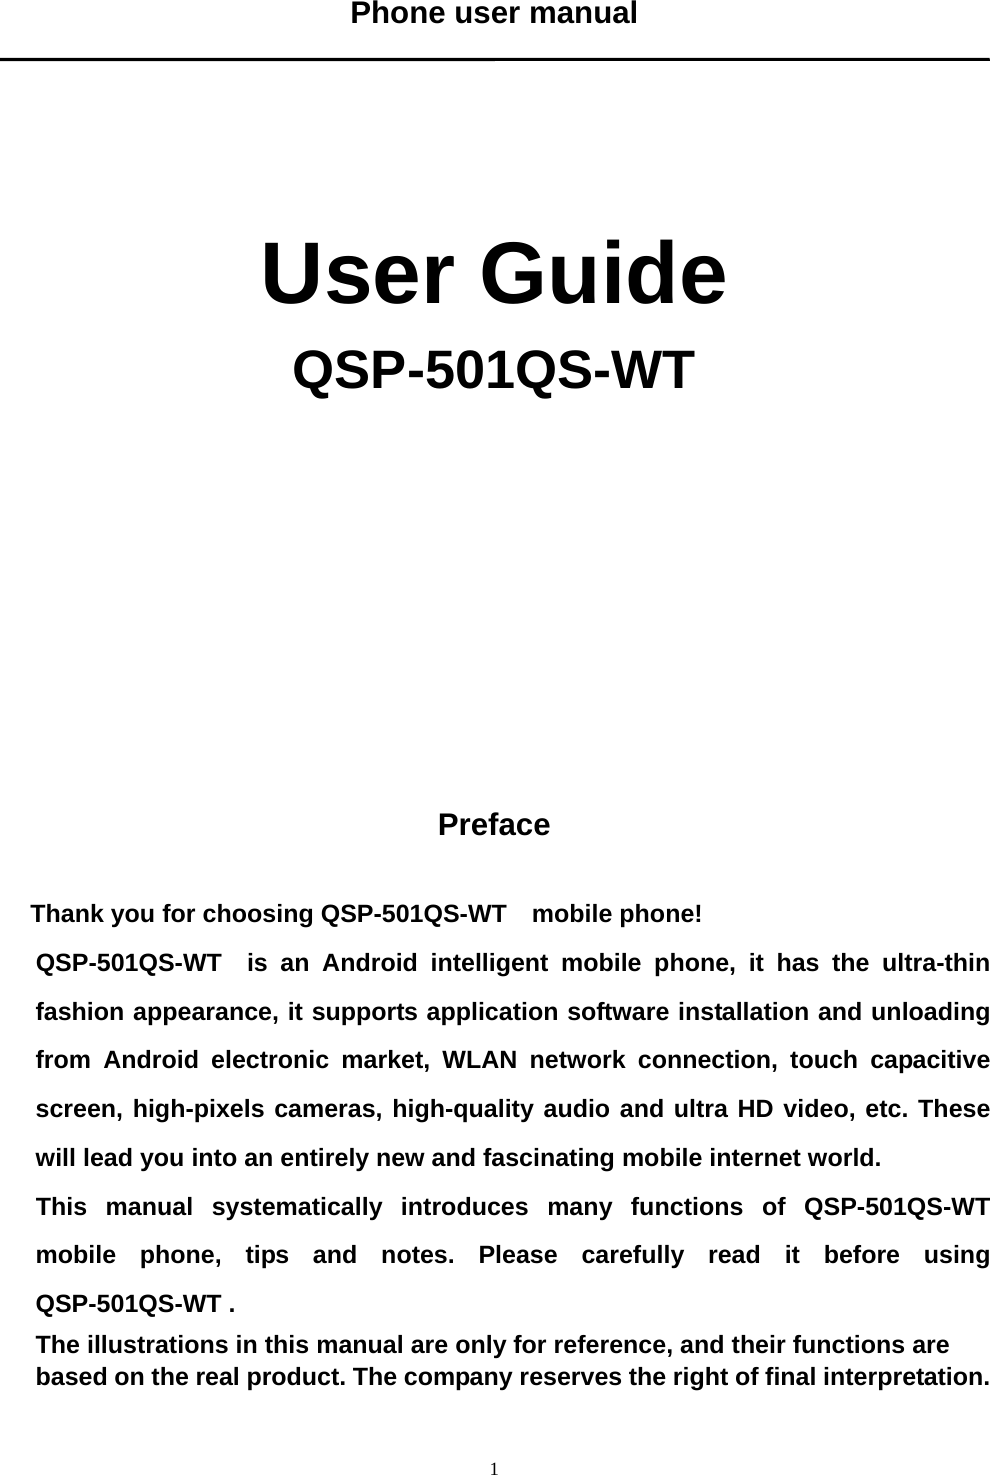   1Phone user manual      User Guide QSP-501QS-WT               Preface  Thank you for choosing QSP-501QS-WT    mobile phone! QSP-501QS-WT  is an Android intelligent mobile phone, it has the ultra-thin fashion appearance, it supports application software installation and unloading from Android electronic market, WLAN network connection, touch capacitive screen, high-pixels cameras, high-quality audio and ultra HD video, etc. These will lead you into an entirely new and fascinating mobile internet world. This manual systematically introduces many functions of QSP-501QS-WT  mobile phone, tips and notes. Please carefully read it before using QSP-501QS-WT .   The illustrations in this manual are only for reference, and their functions are based on the real product. The company reserves the right of final interpretation.  